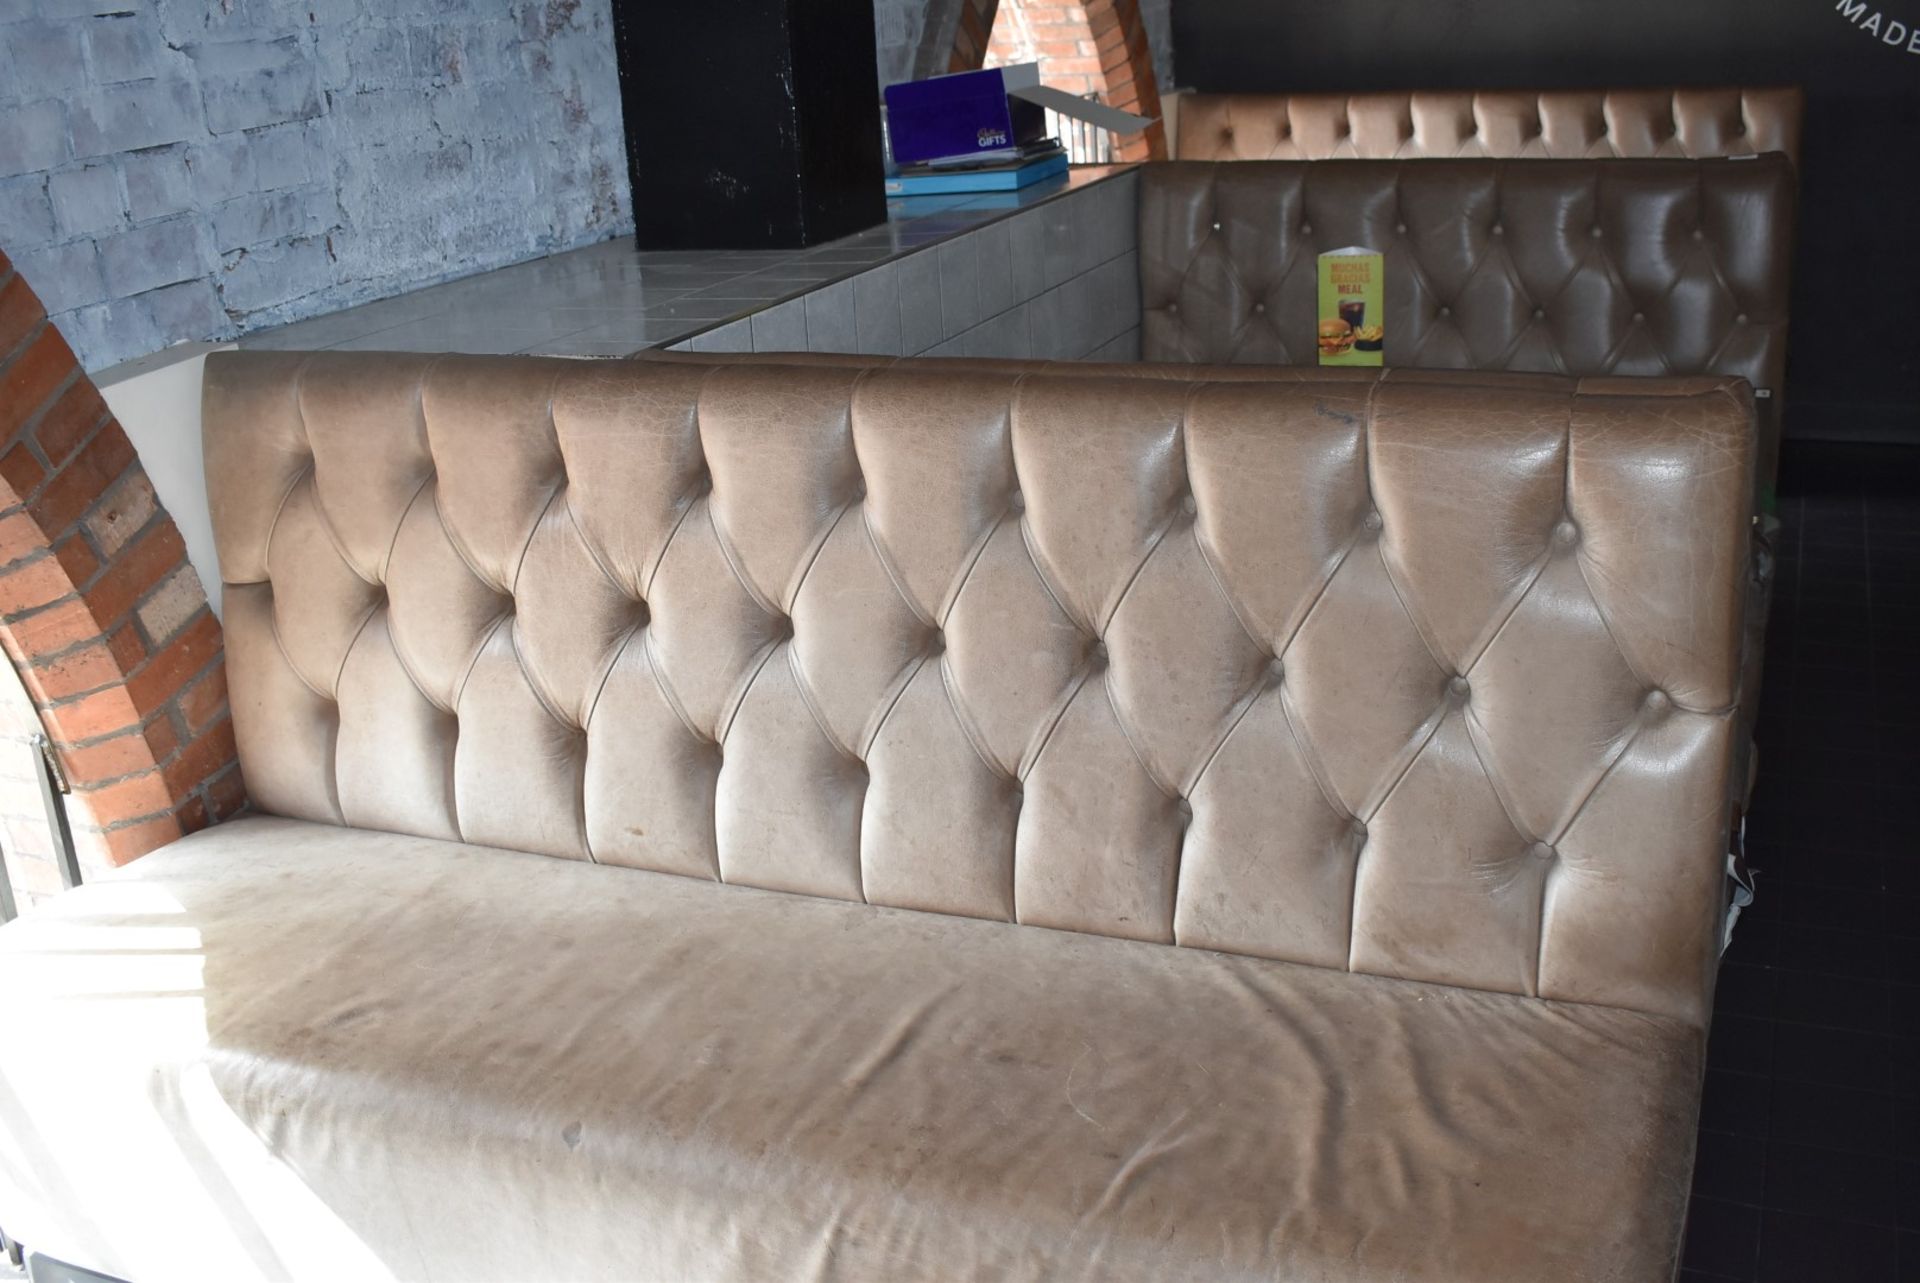 1 x Collection of Restaurant Seating Benches With Brown Leather Upholstery and Studded Backs - Image 25 of 26